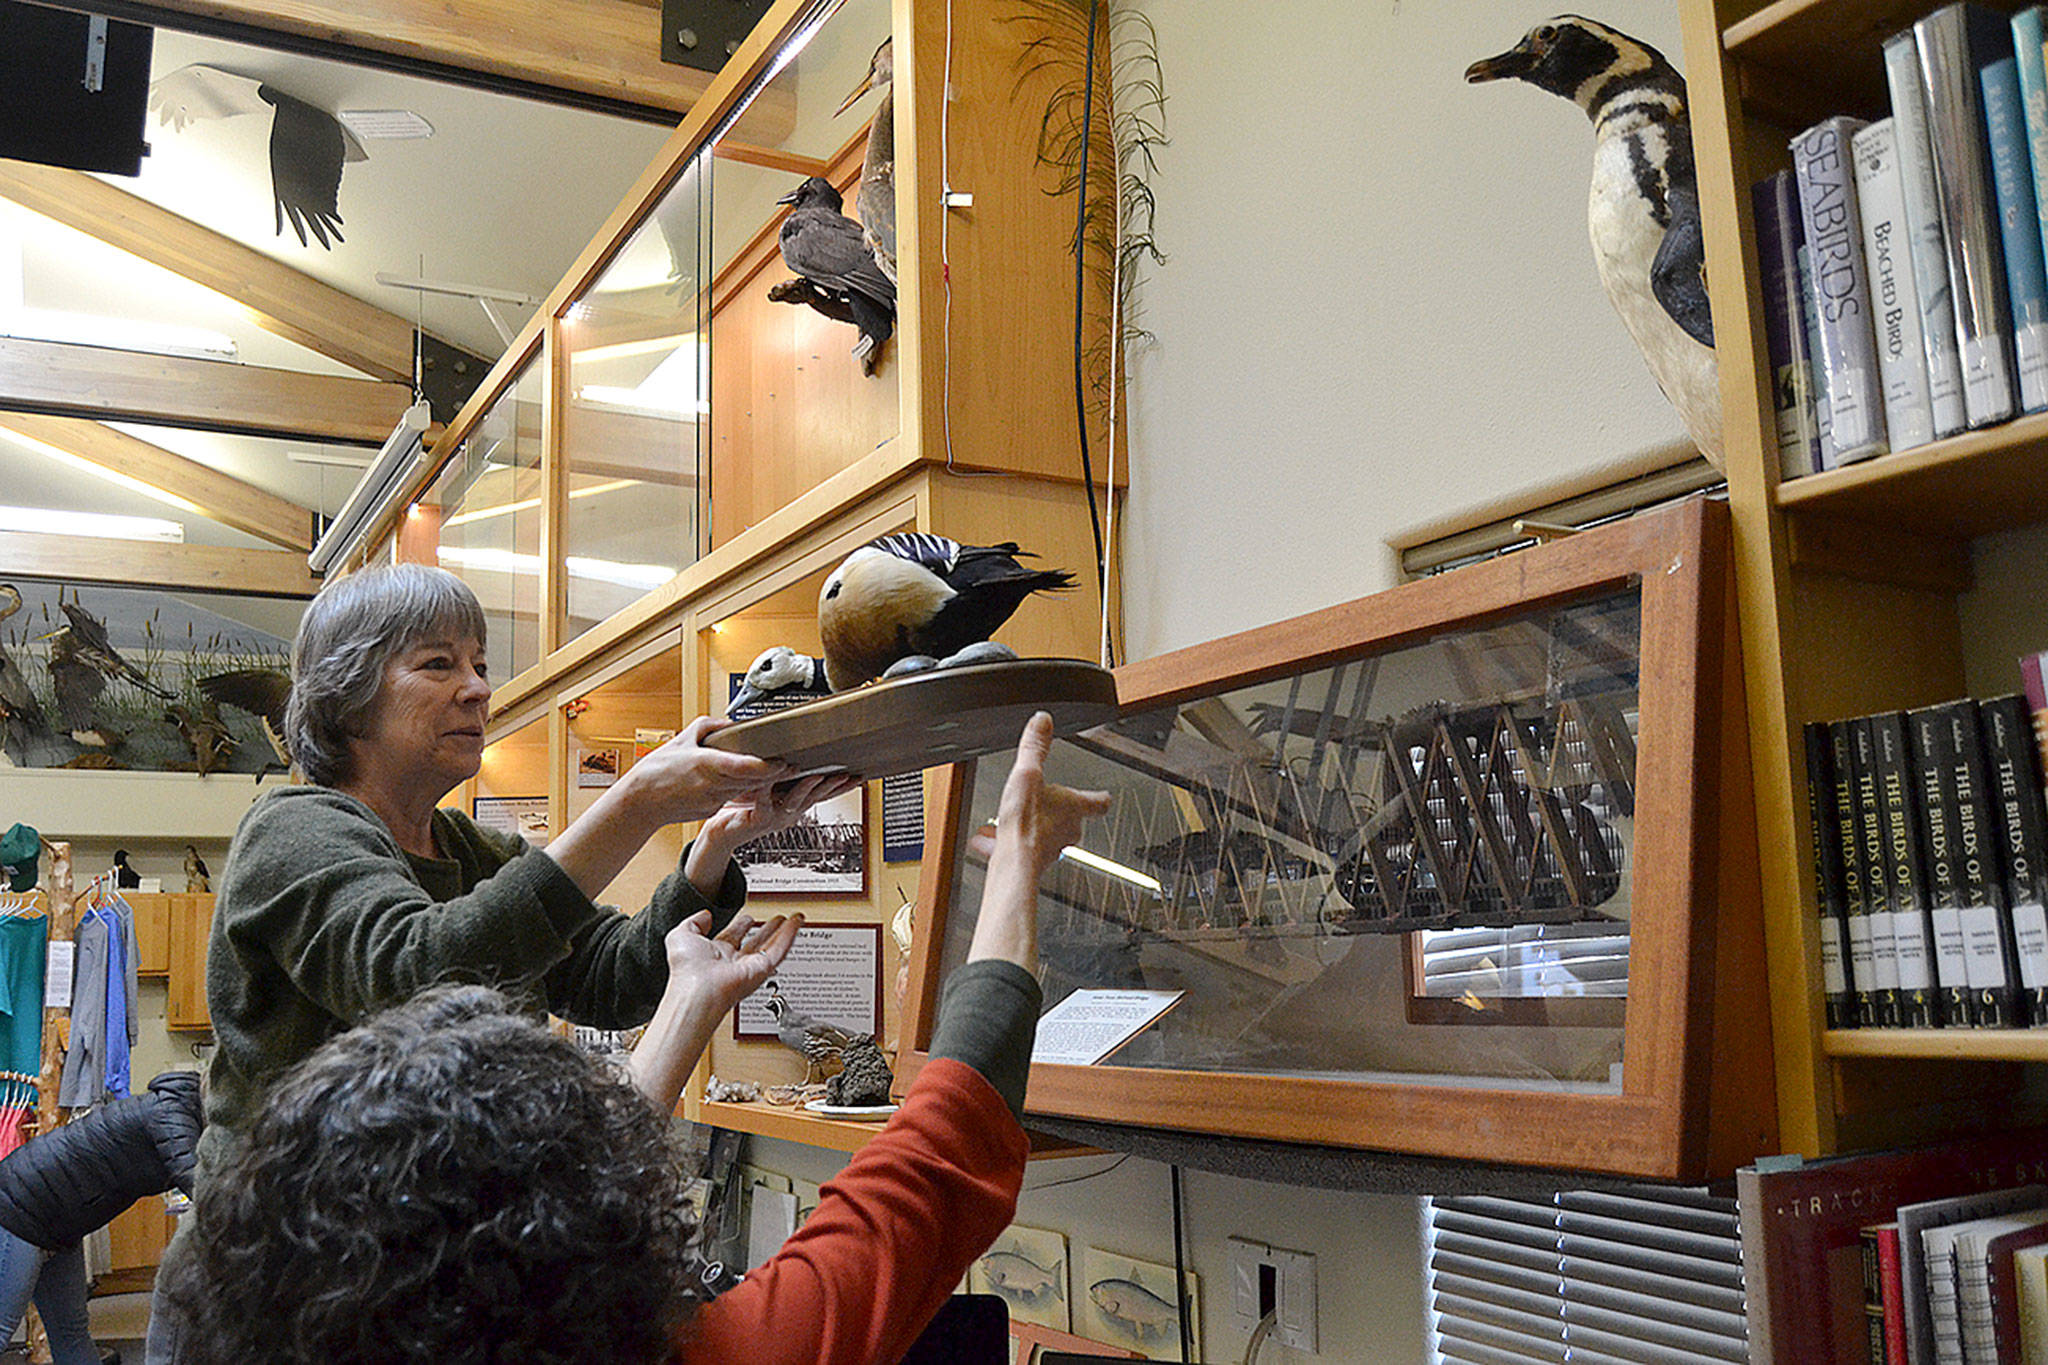 Darcy McNamara, a Dungeness River Audubon Center board member, and Sharon Travers, a center volunteer, help each other take one of many birds down on Jan. 24 to seal up and freeze. McNamara and her friend Terri Tyler of Sequim discovered drugstore beetles on Jan. 23 in the center that could harm its taxidermy collection.